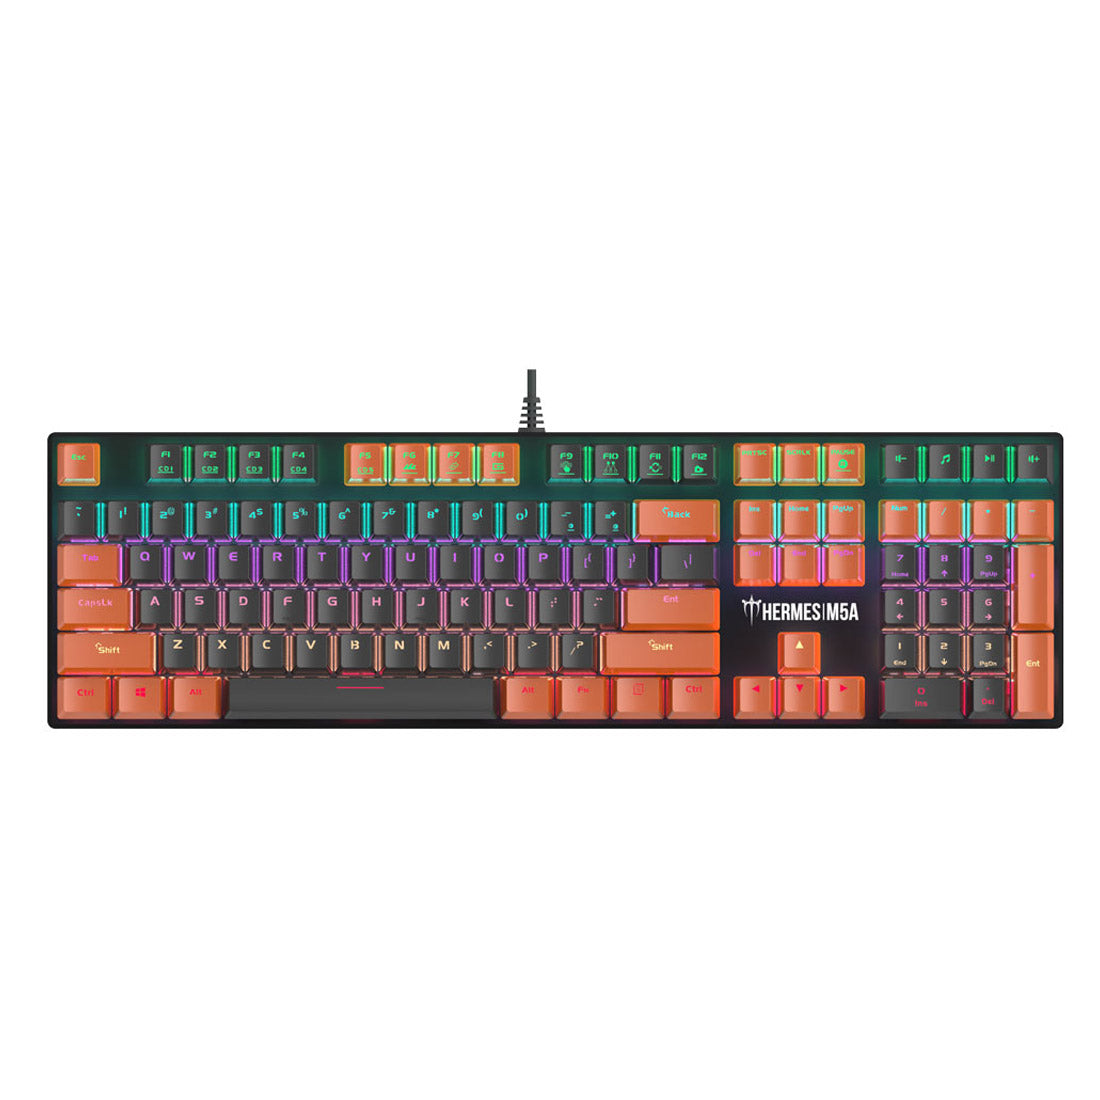 Gamdias HERMES M5A Mechanical Multi-Color Wired Gaming Keyboard with 32-Bit Built-in Memory